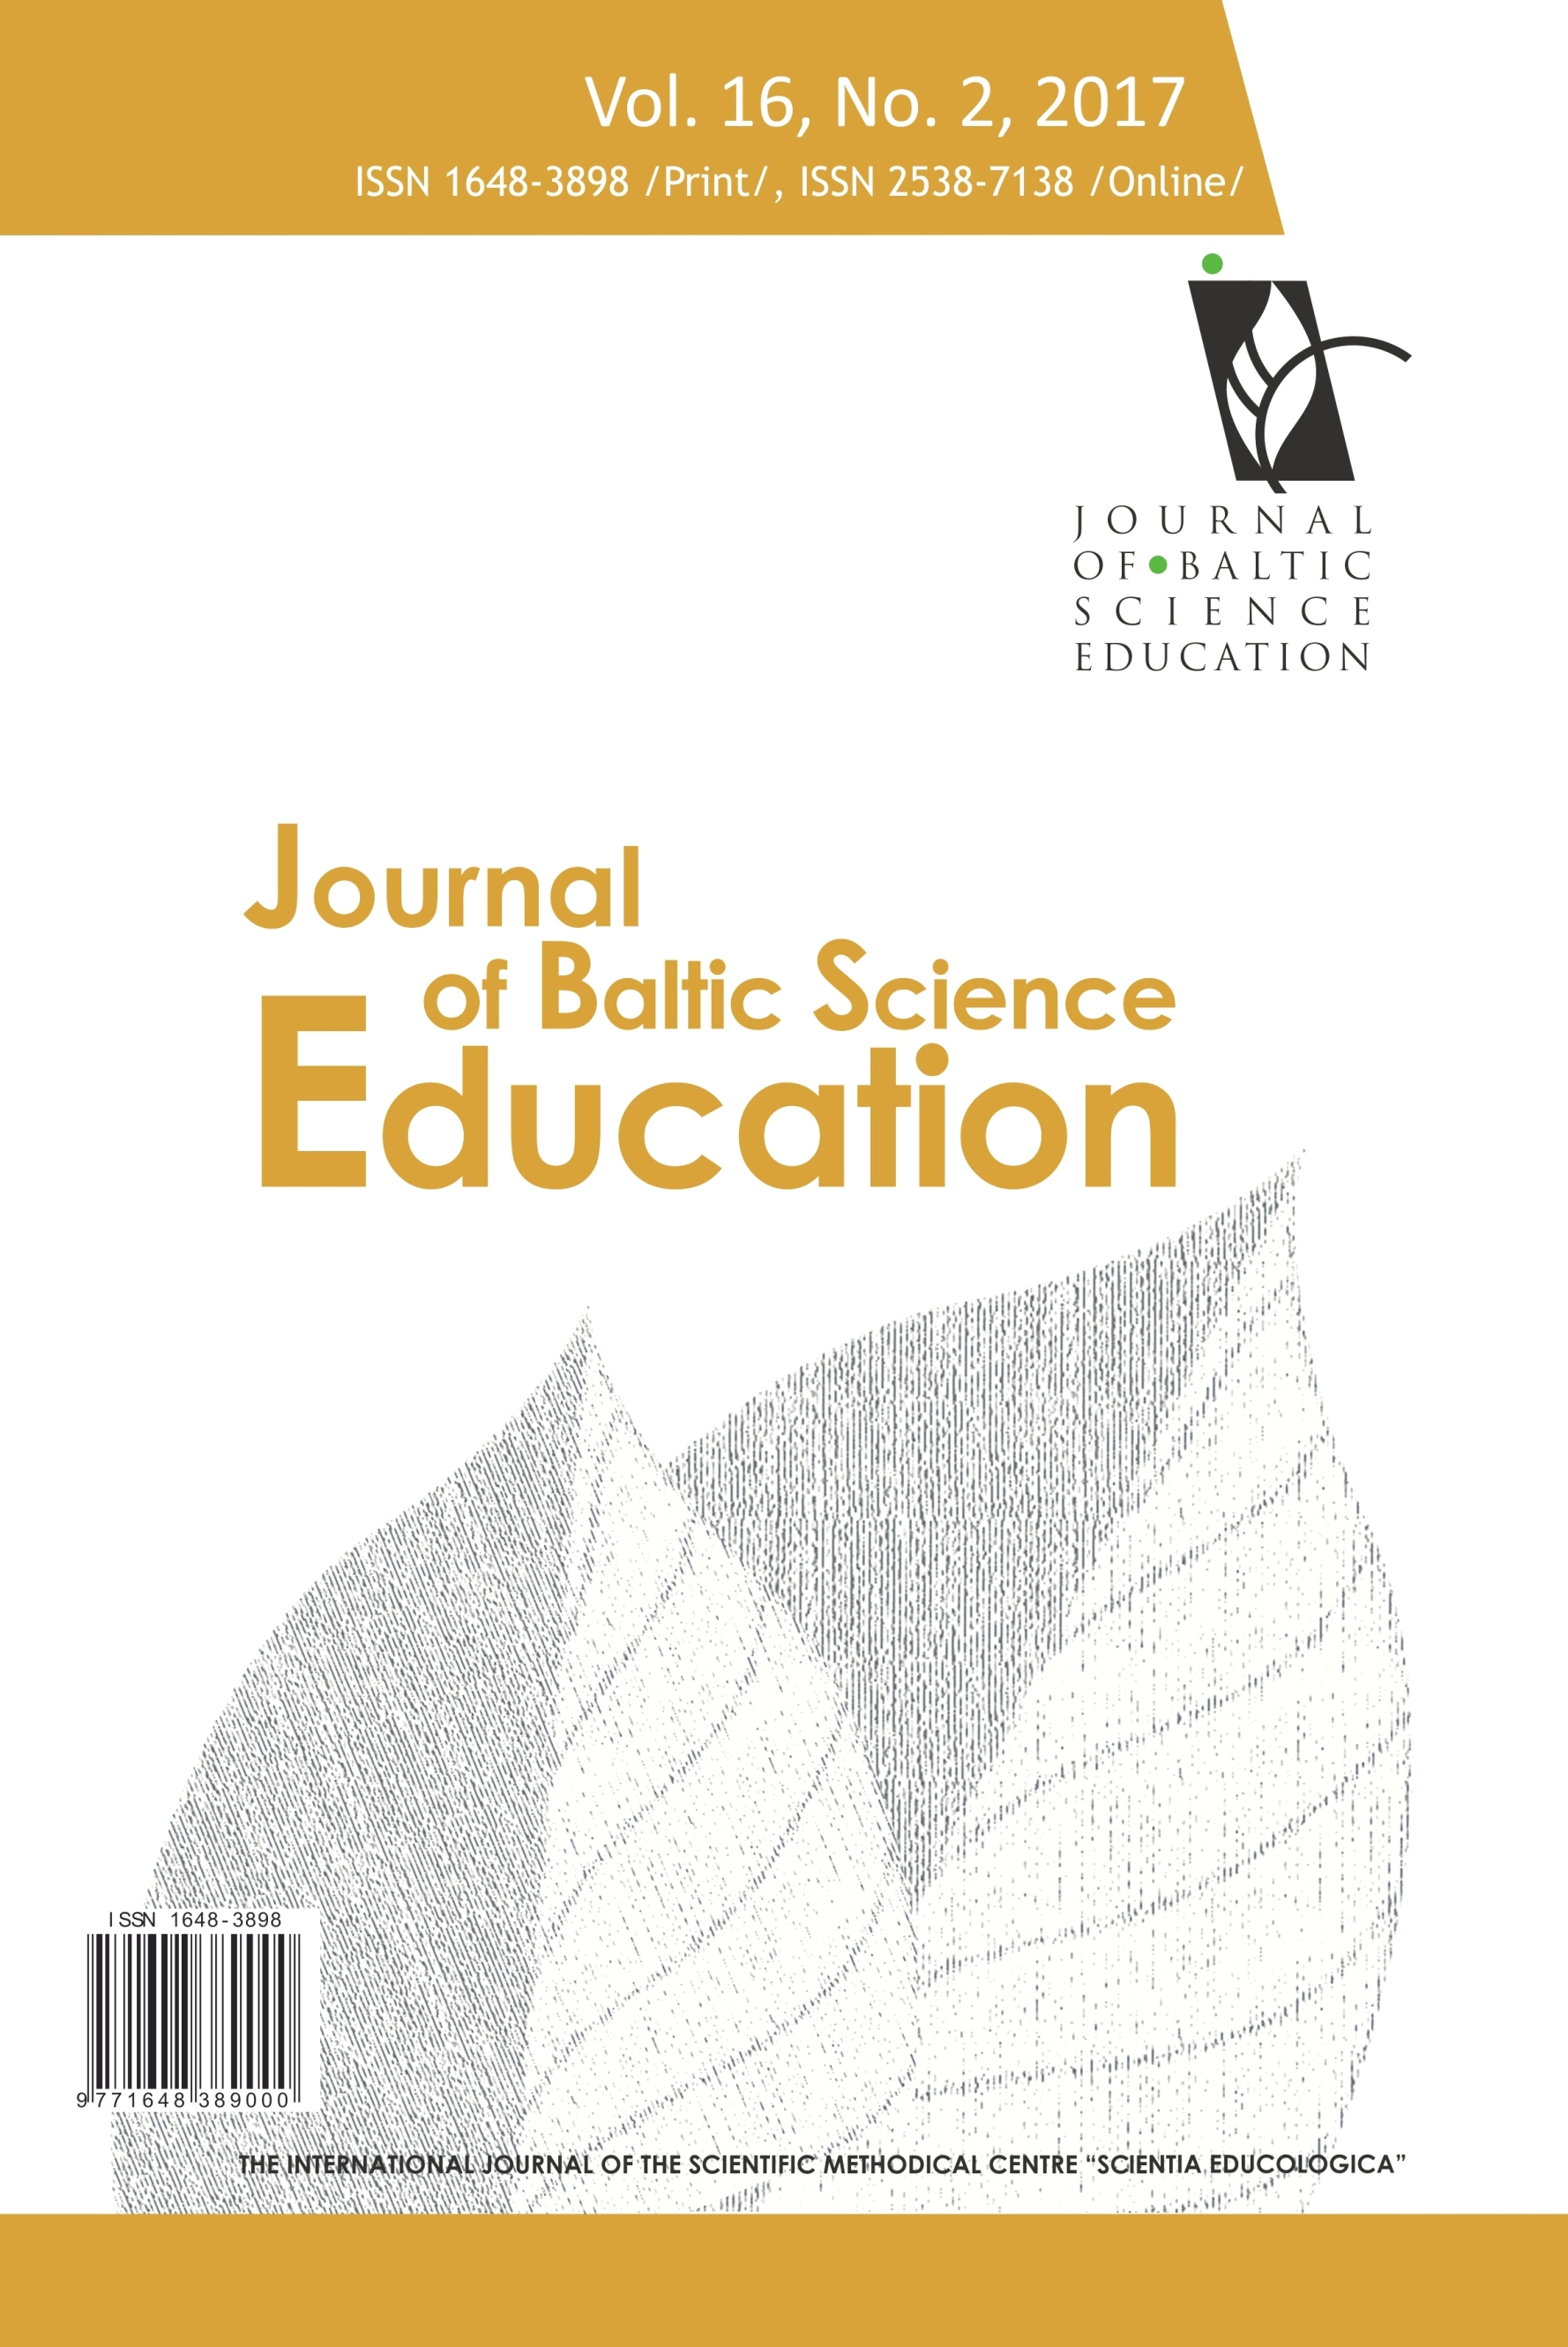 THE EFFECTS OF COMBINING INQUIRY-BASED TEACHING WITH SCIENCE MAGIC ON THE LEARNING OUTCOMES OF A FRICTION UNIT Cover Image